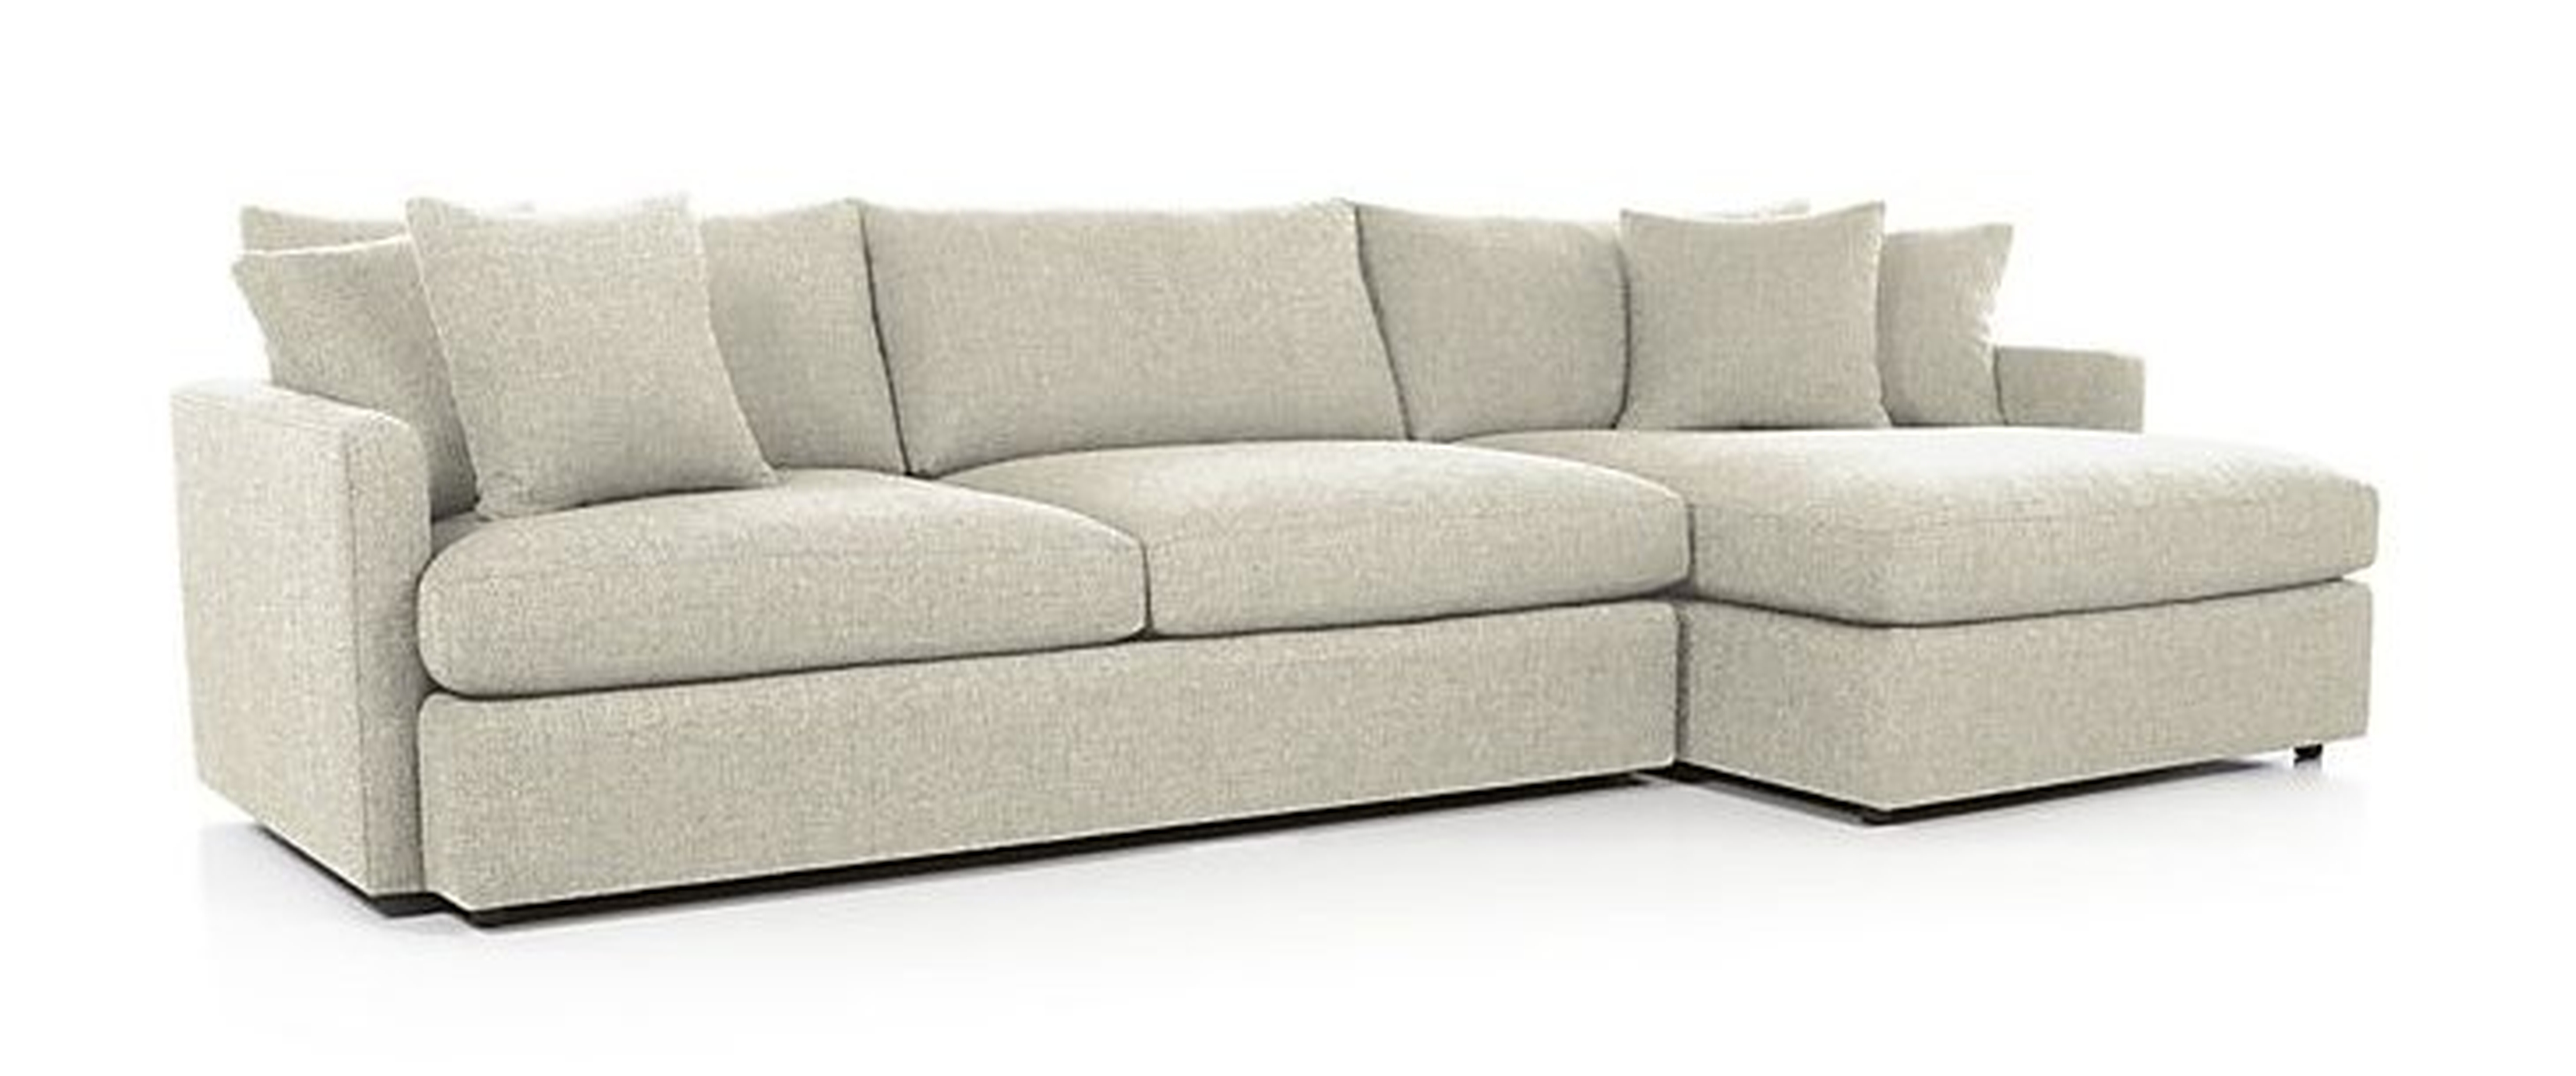 Lounge II 2-Piece Sectional Sofa - Taft Cement - Crate and Barrel